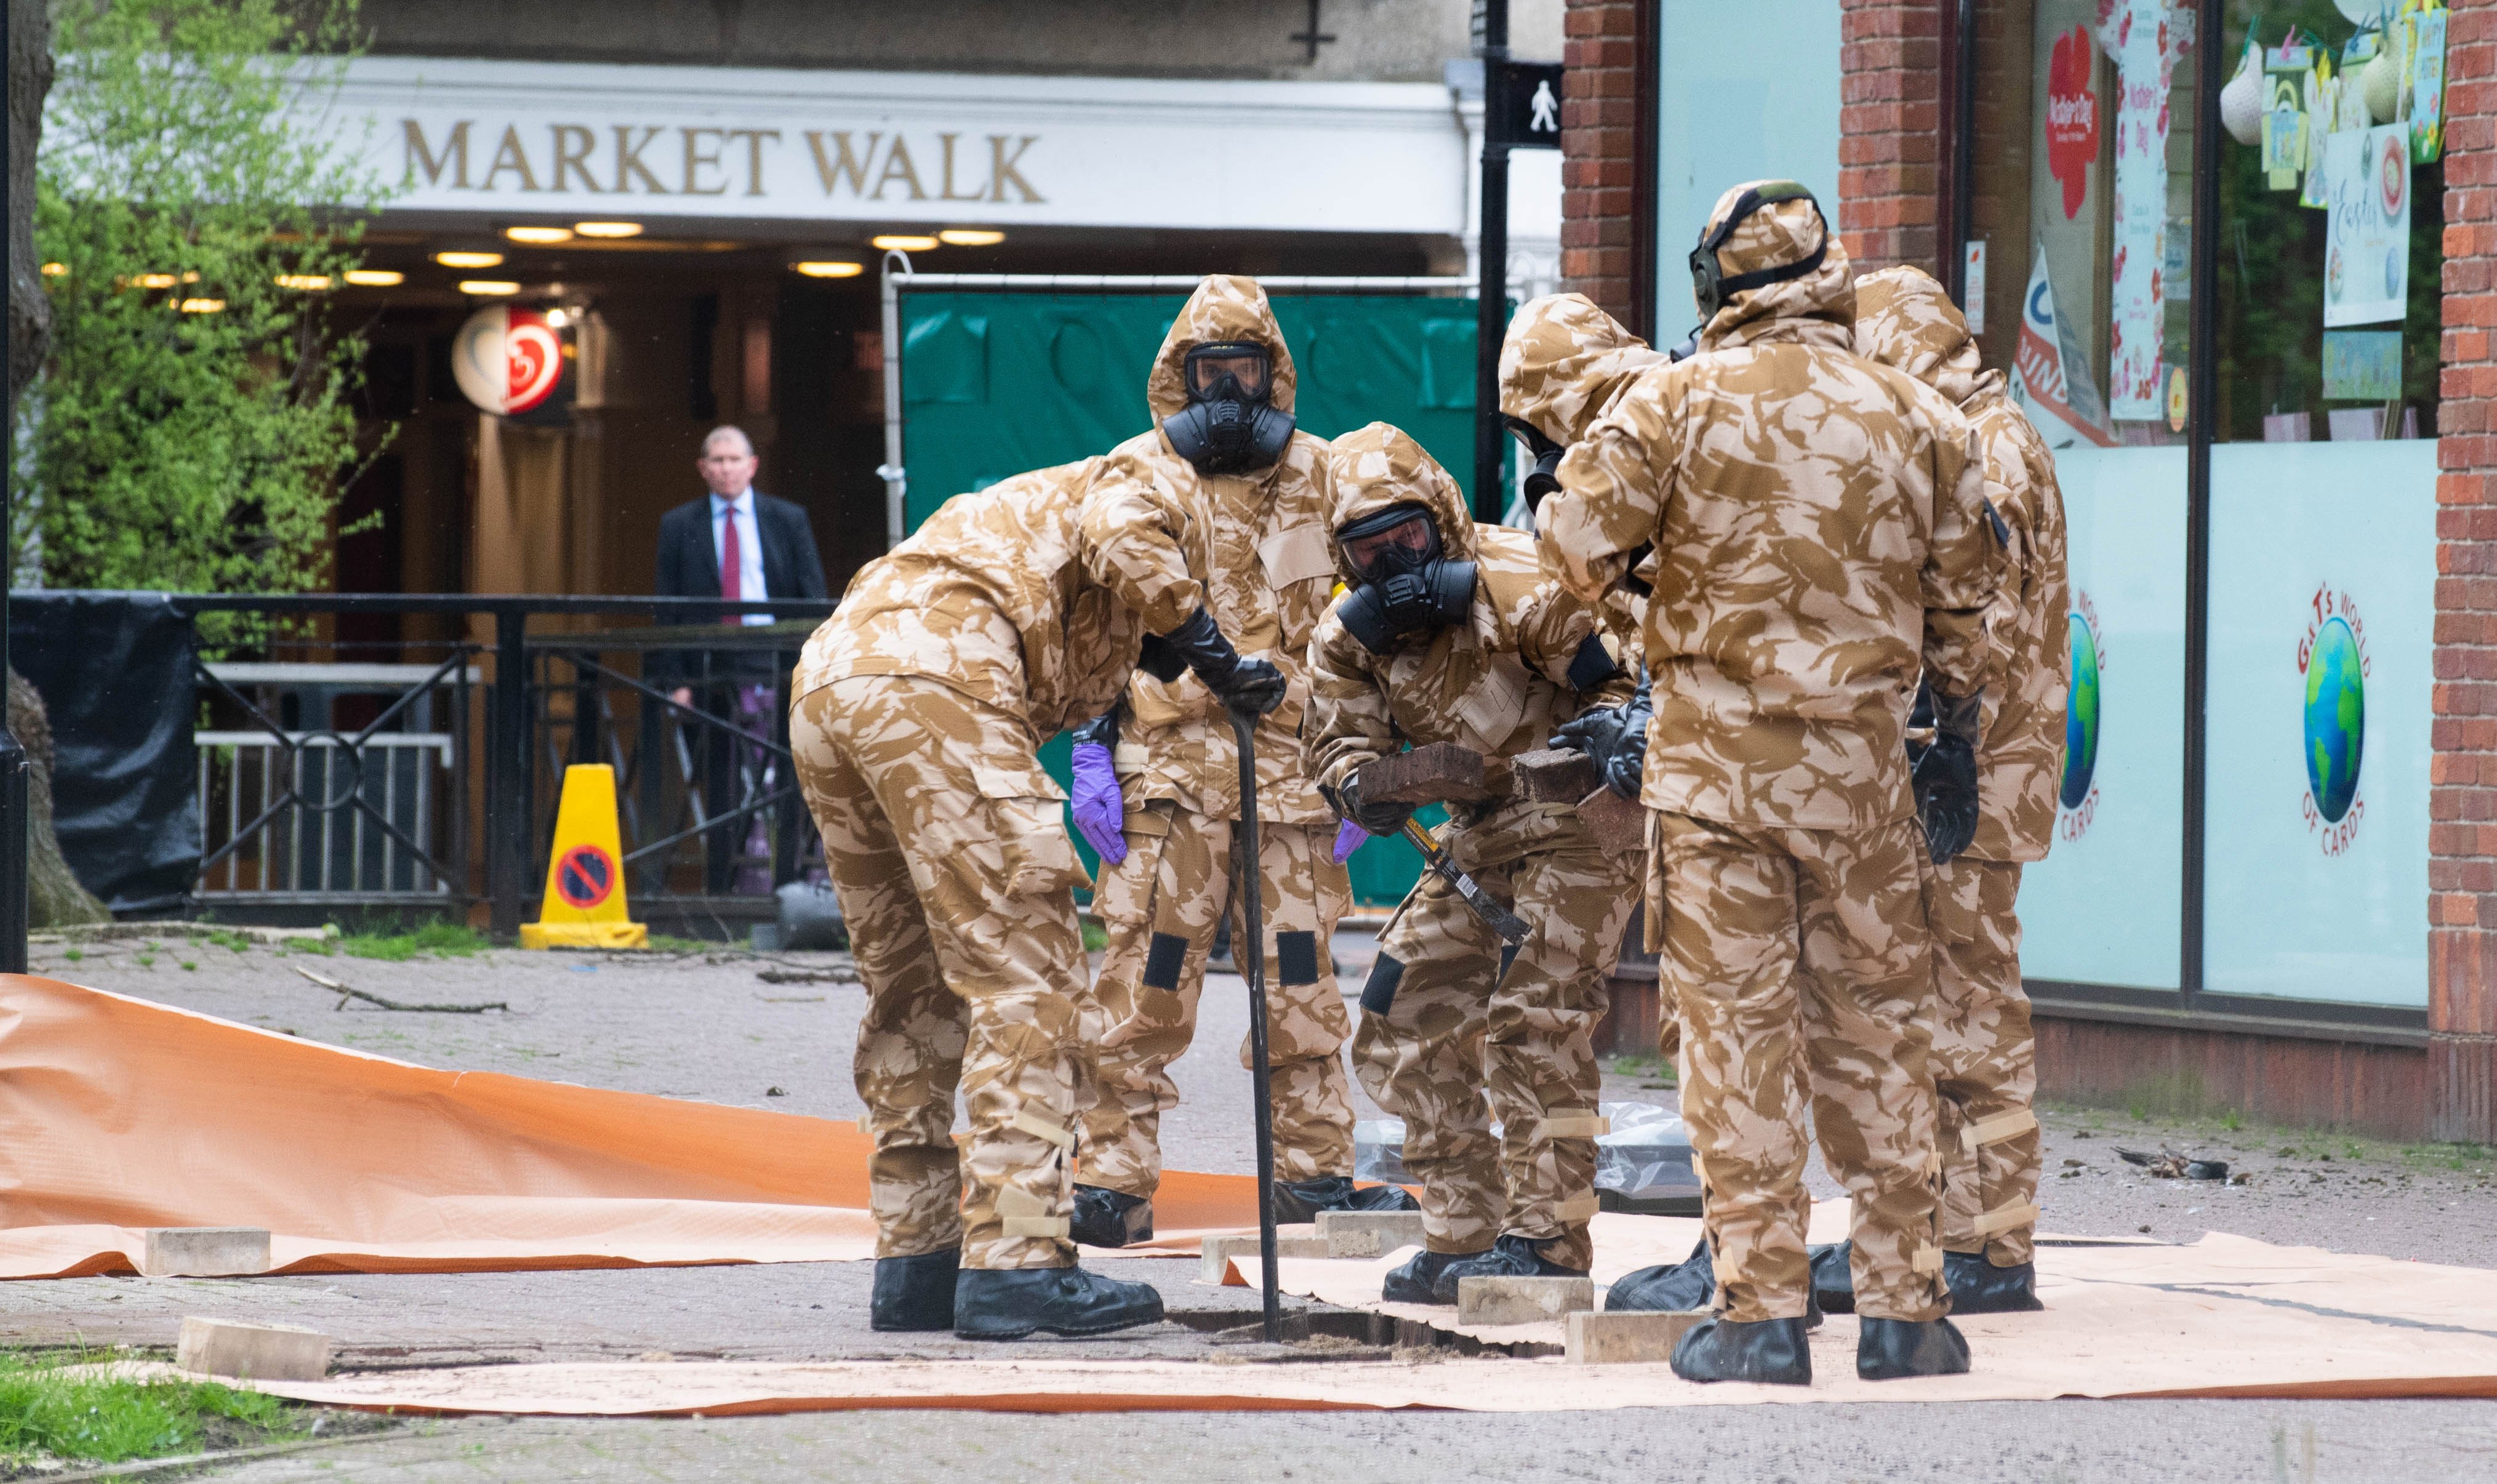 epa06689284 A handout photo made available by the British Ministry of Defence (MoD) showing British millitary personnel from Suffolk based 20 Wing Royal Air Force Regiment and Wiltshire based 22 Engineer Regiment are working in The Maltings Shopping Centre, in Salisbury, Wiltshire, Britain, 24 April 2018 to remove material in accordance with direction by the British Department for Environment, Food and Rural Affairs (DEFRA). Military personnel from the Army and the Royal Air Force have commenced work today in support of DEFRA and the civil authorities with the recovery operation in Salisbury, Wiltshire in the aftermath of the nerve agent attack in March against Russian ex-spy Sergei Skripal and his daughter Yulia Skripal. Around 190 military personnel in total will assist in the recovery operation providing key skills, equipment and capability.  EPA/CPL PETE BROWN / BRITISH MINISTRY OF DEFENCE/ HANDOUT MANDATORY CREDIT: CPL PETE BROWN MOD: CROWN COPYRIGHT HANDOUT EDITORIAL USE ONLY/NO SALES